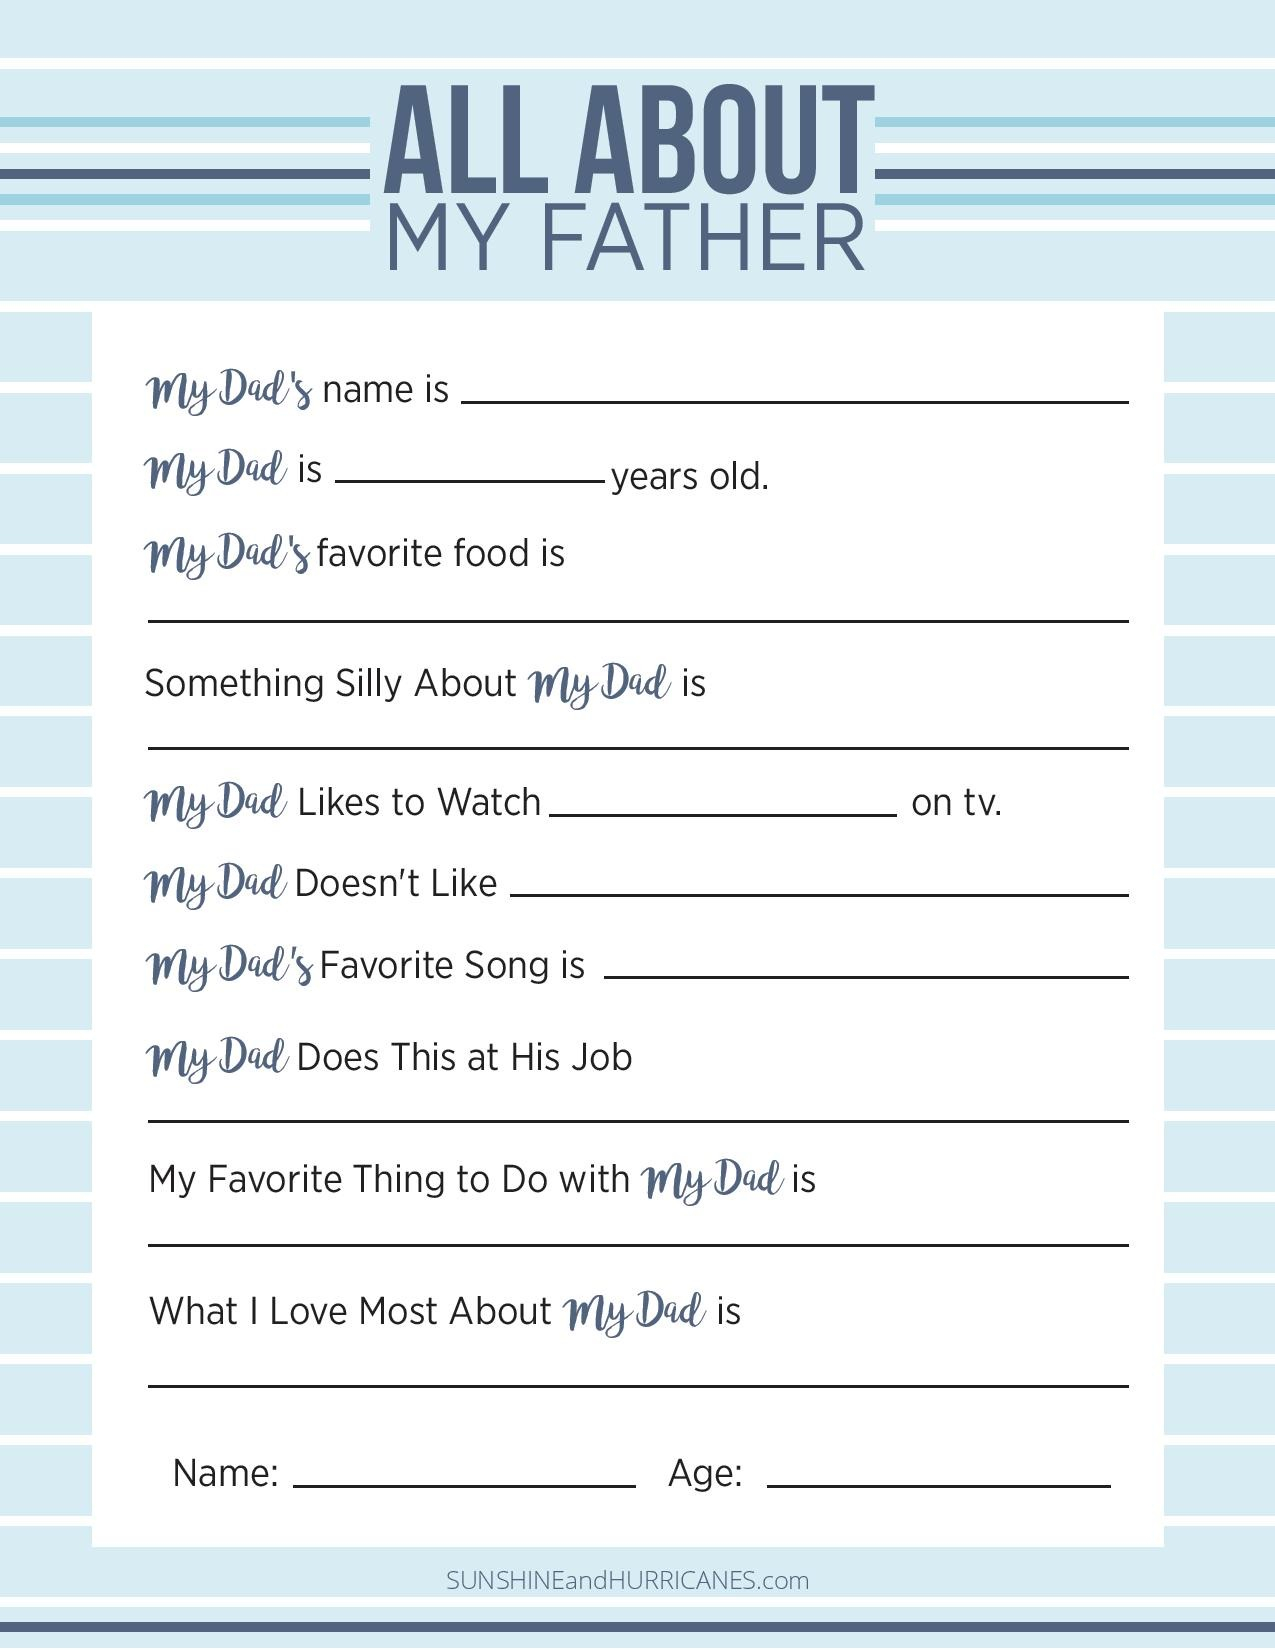 All About My Dad A Printable Father s Day Questionnaire